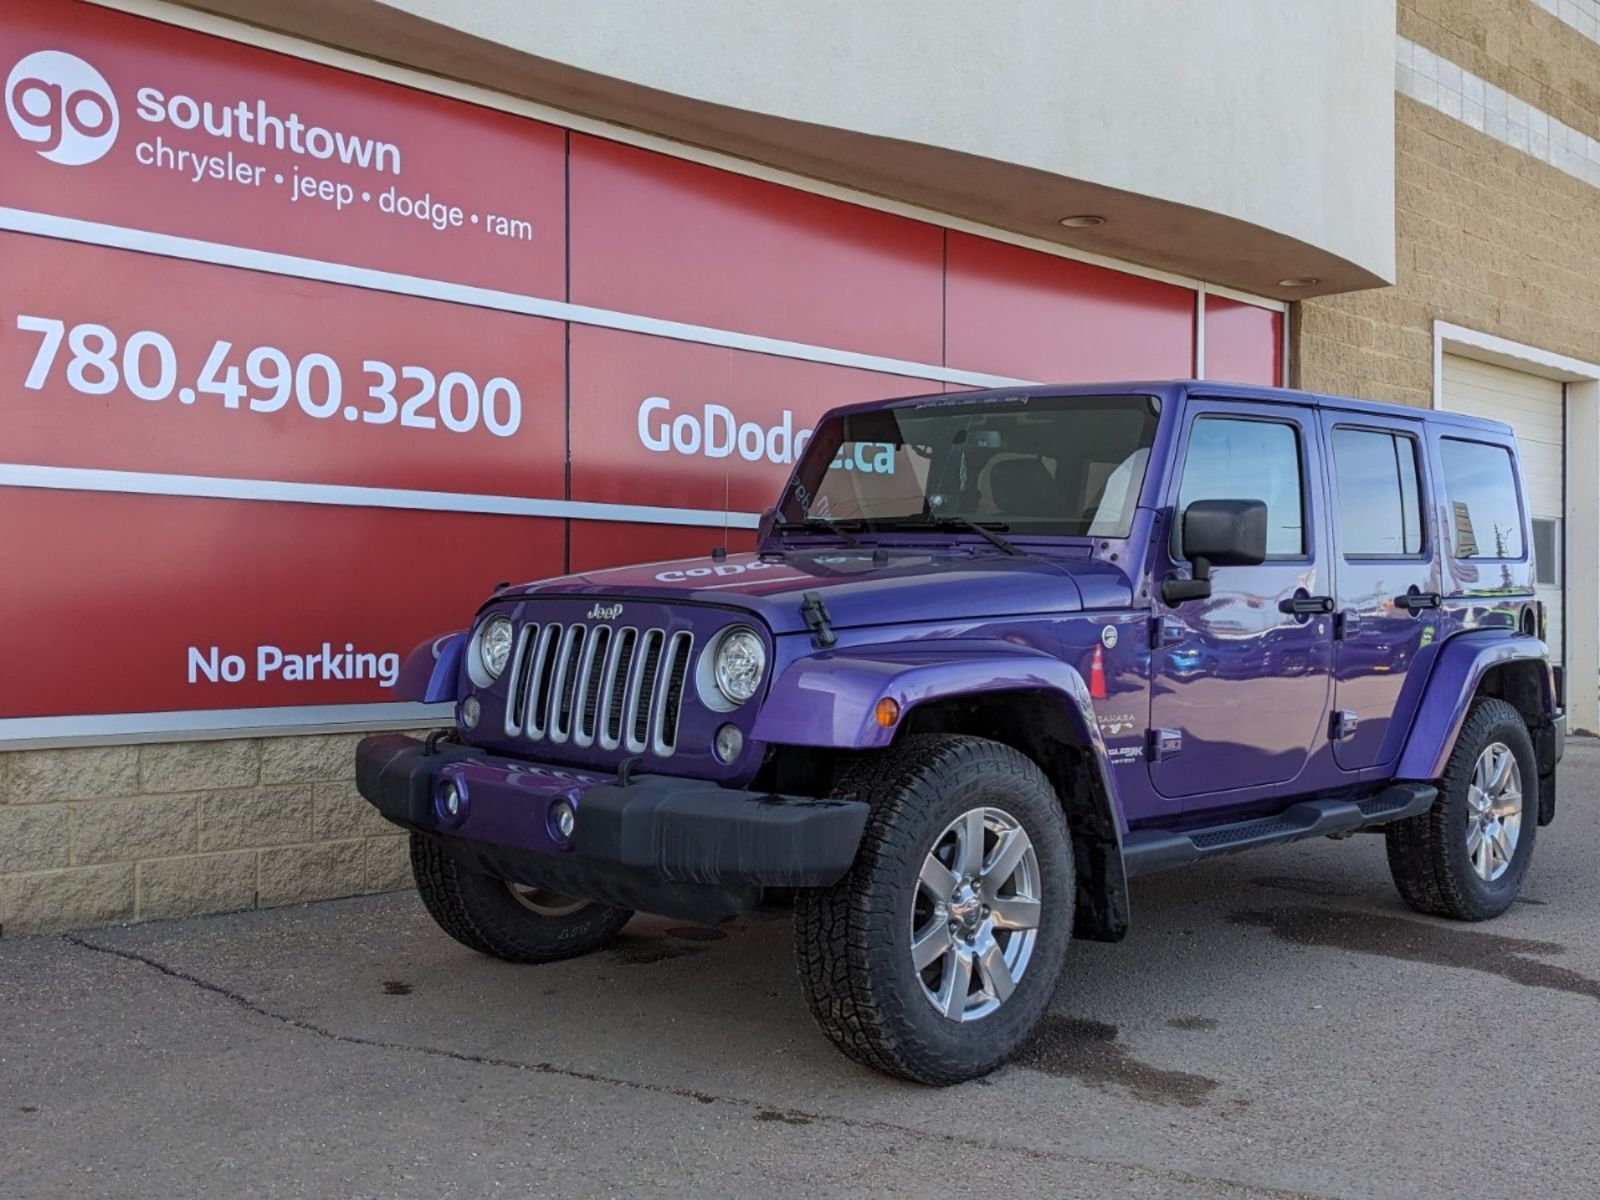 2018 Jeep Wrangler JK Unlimited UNLIMITED SAHARA IN XTREME PURPLE PEARL EQUIPPED W